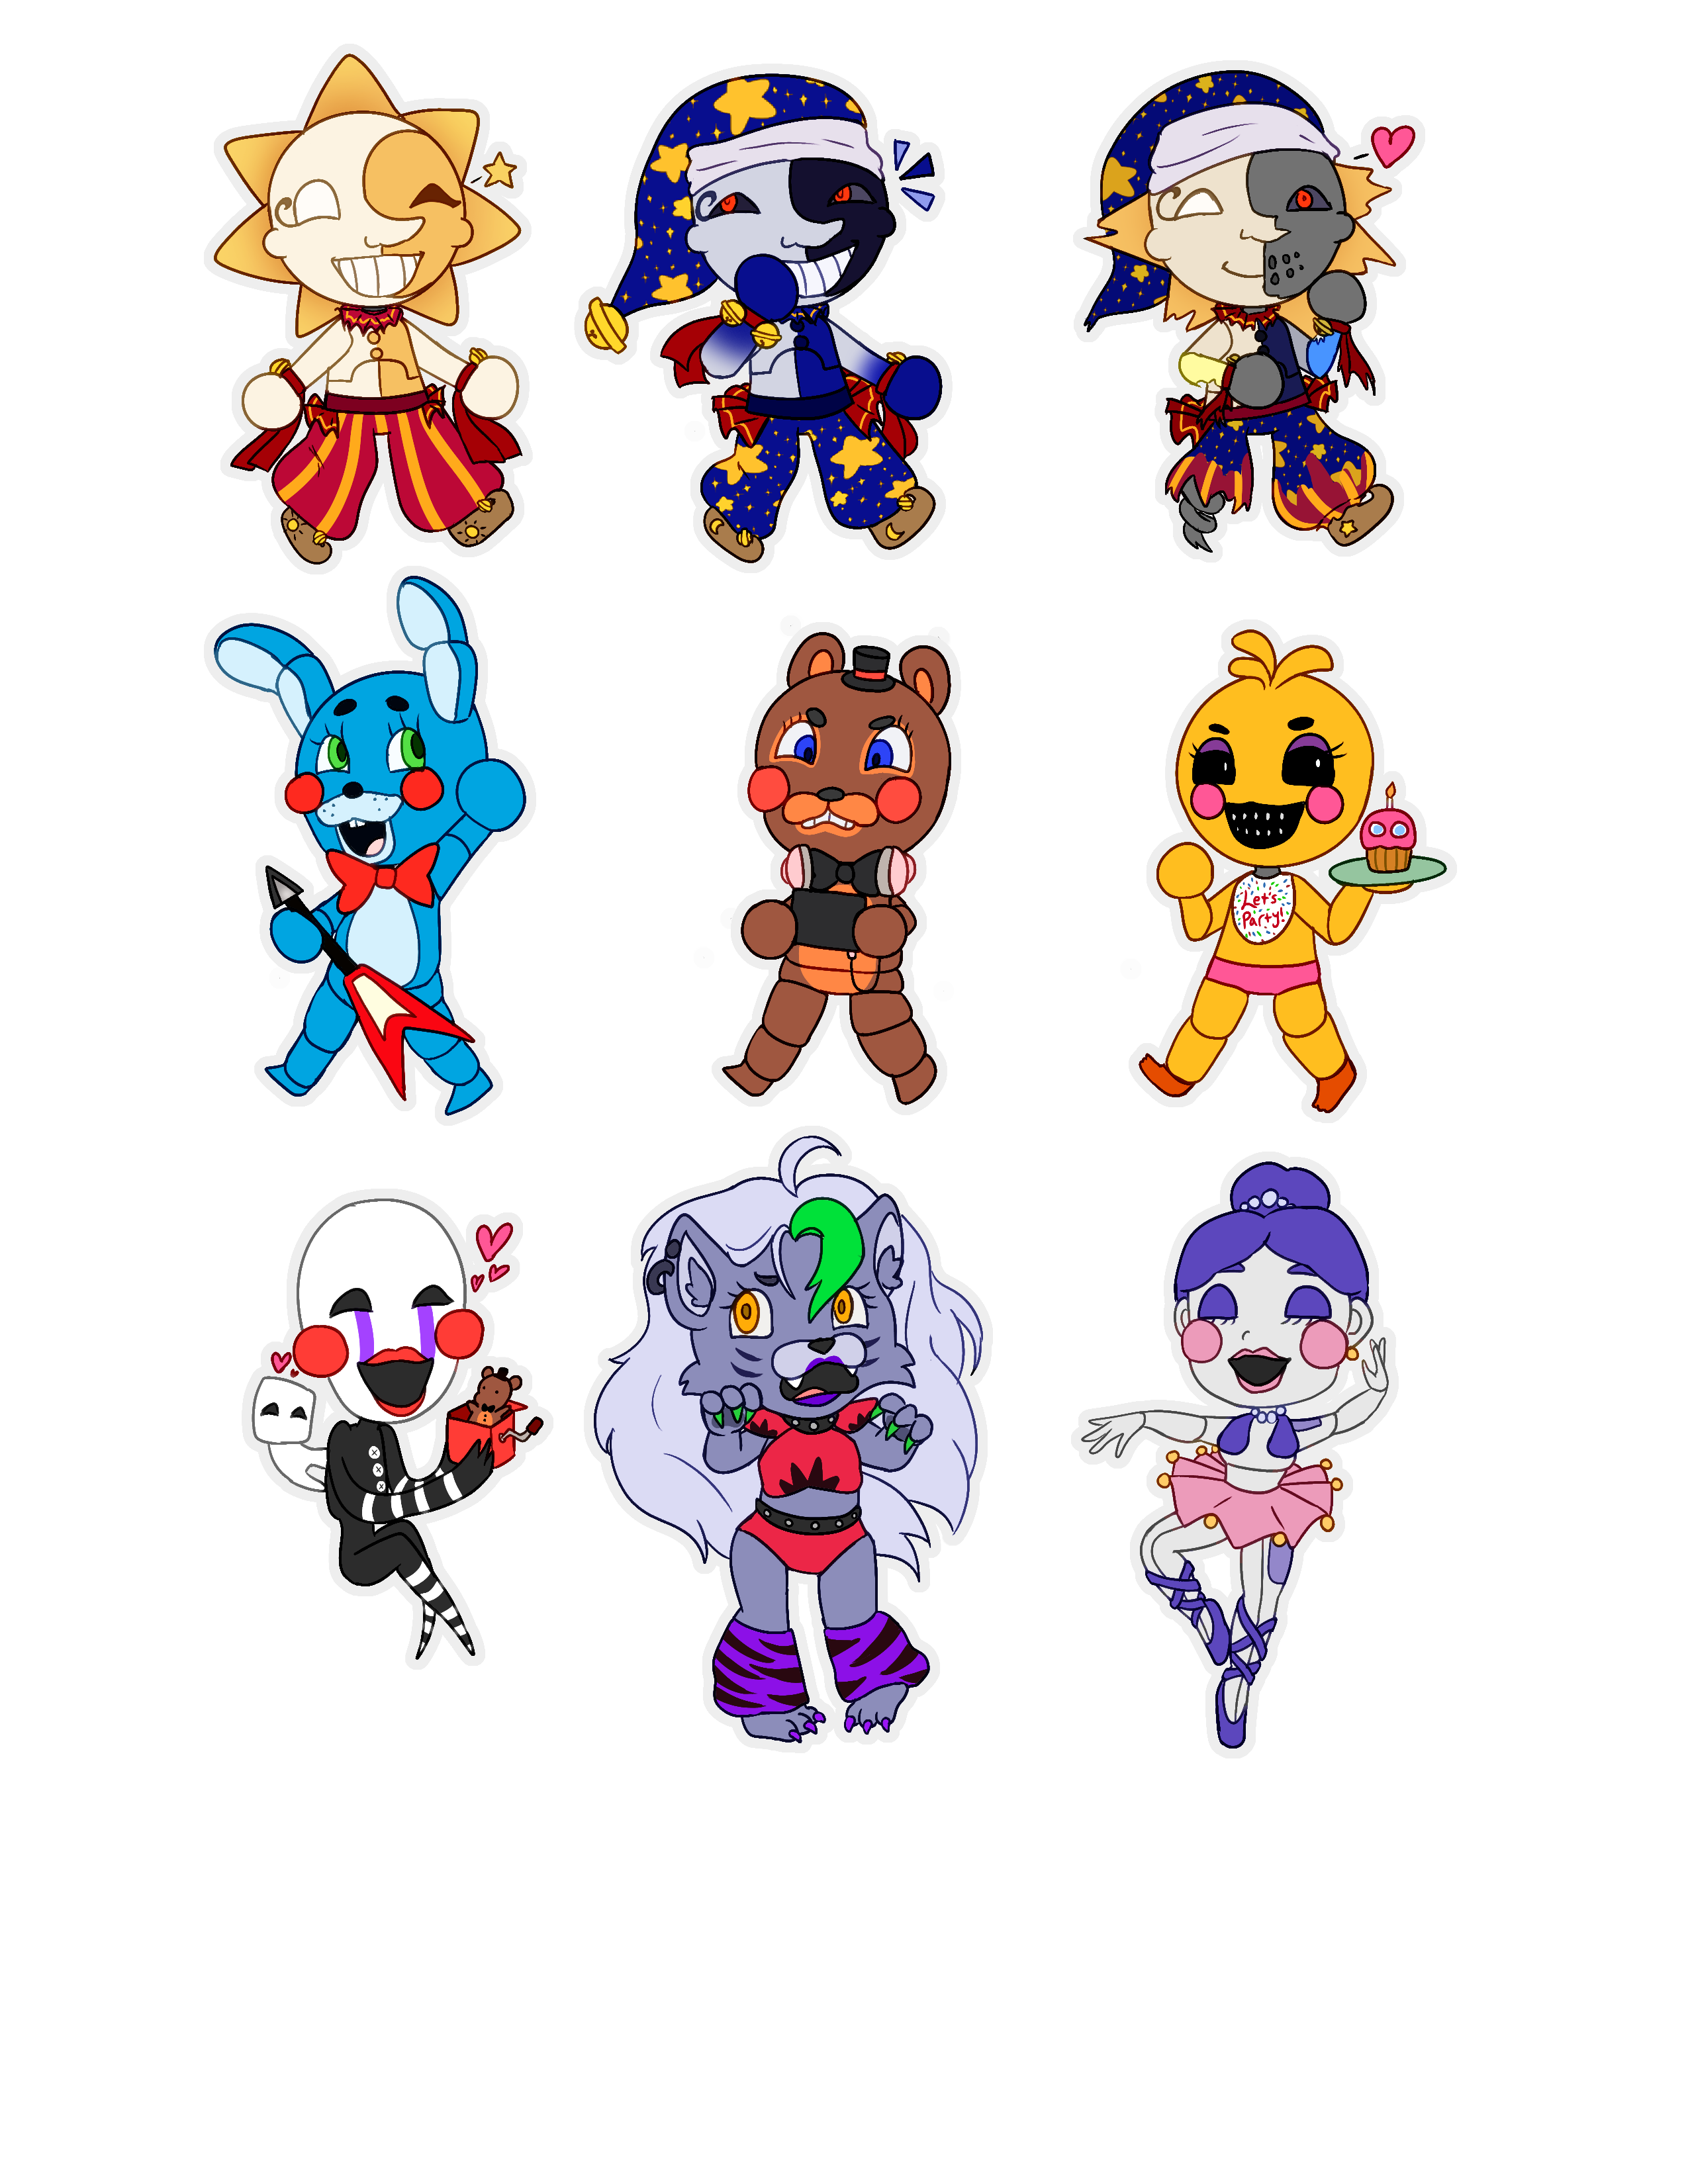 Five Nights at Freddy's 2 stickers